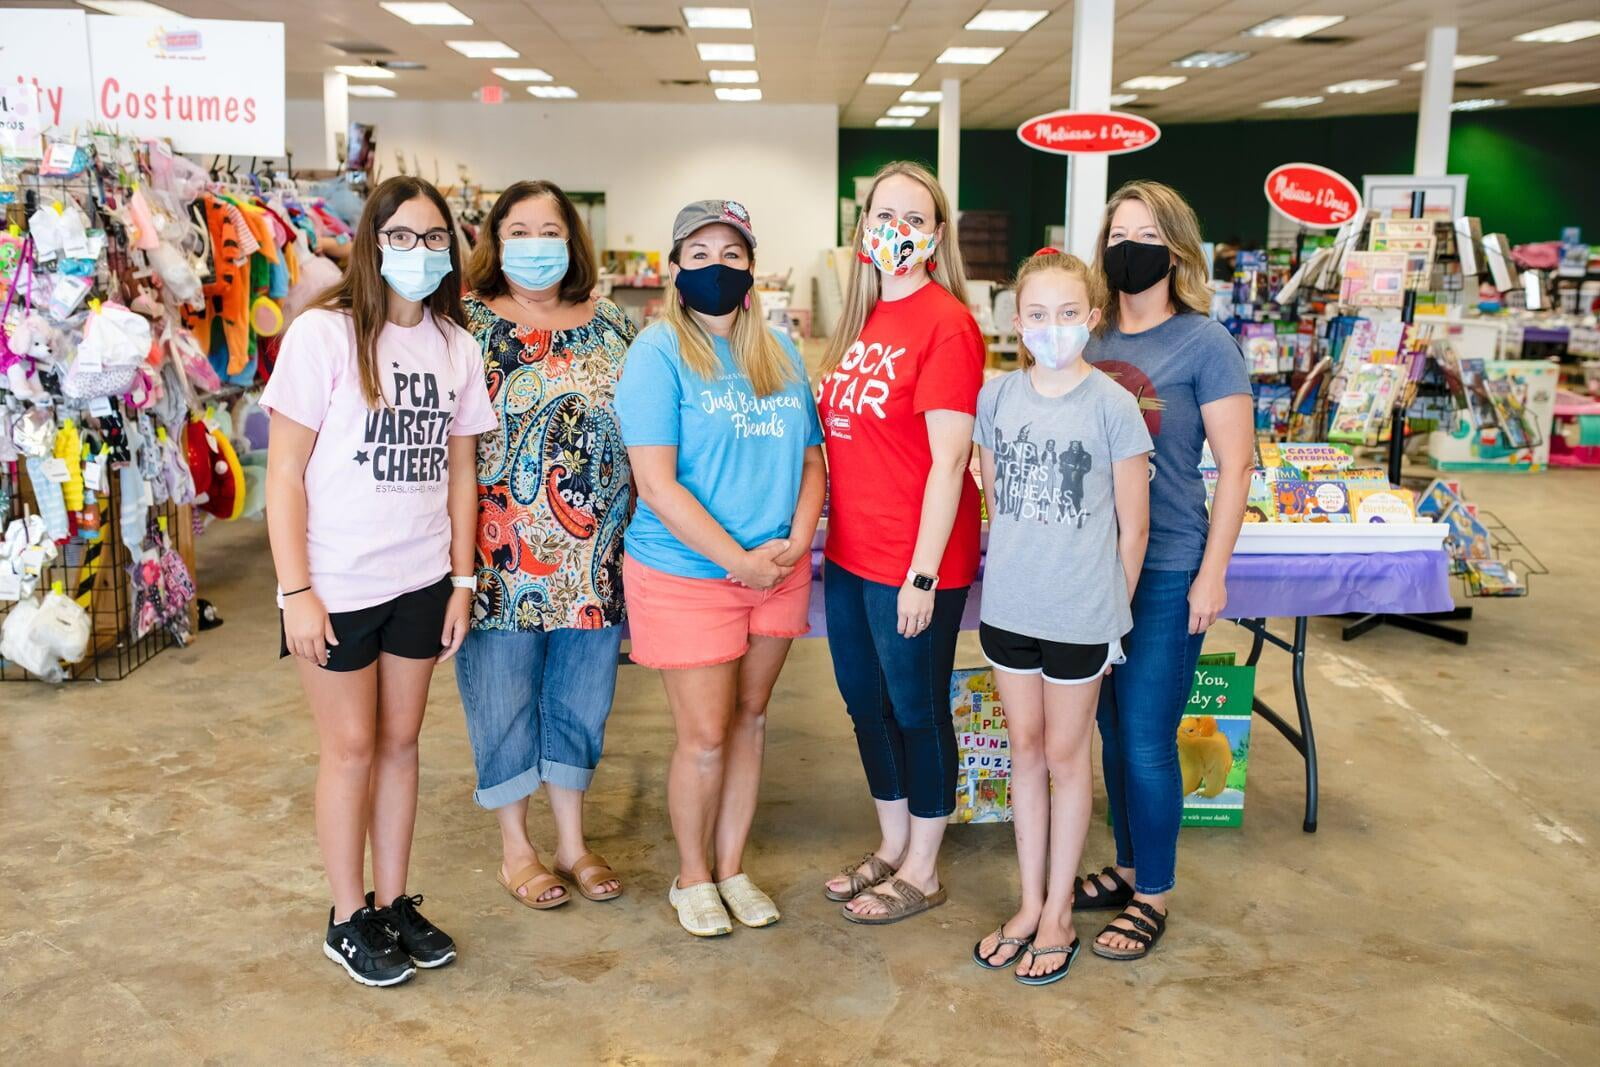 A group of shoppers wearing masks for safety reasons gathers together at the sale to shop.